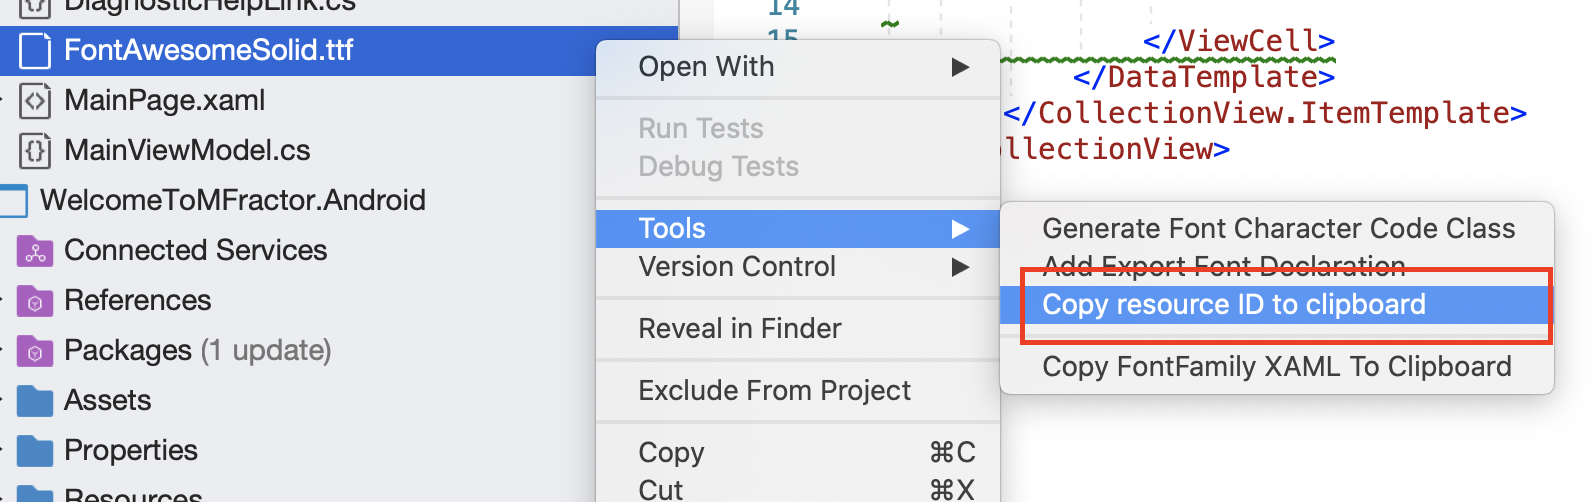 Using the Copy Resource ID to clipboard shortcut